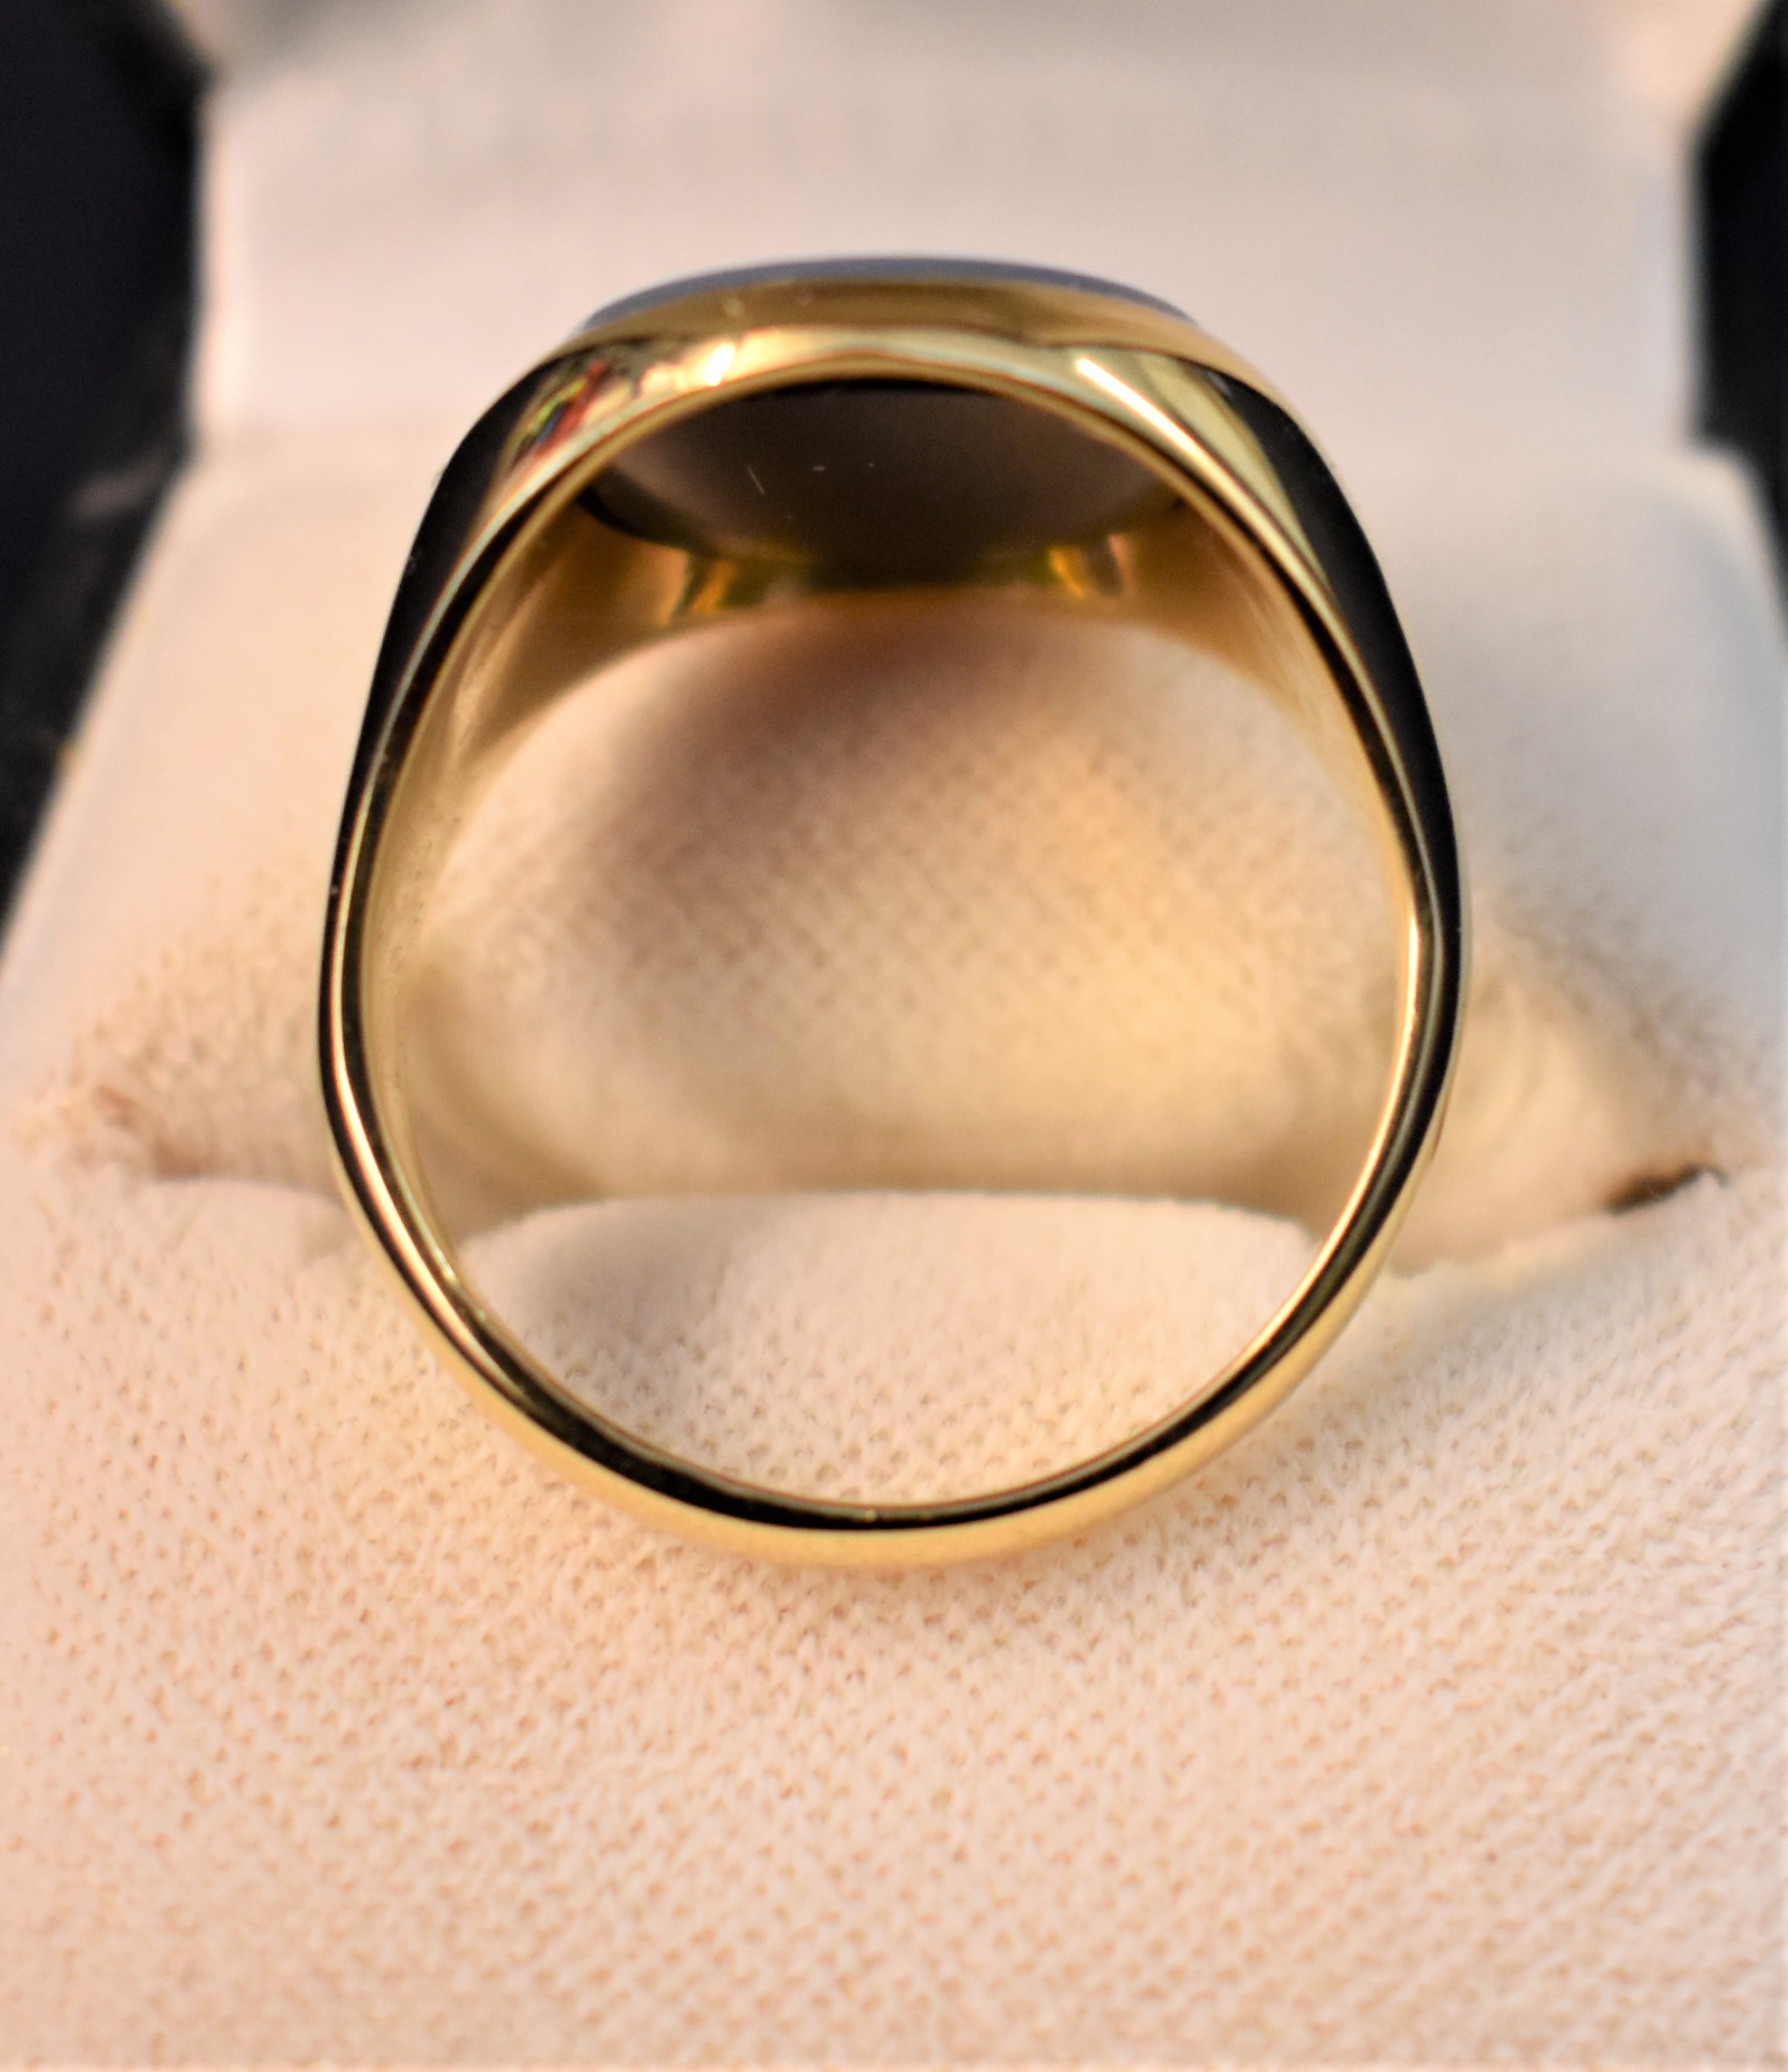 Gentleman's 18ct Gold Ring with a deep blue stone, boxed. Size T - Image 2 of 3